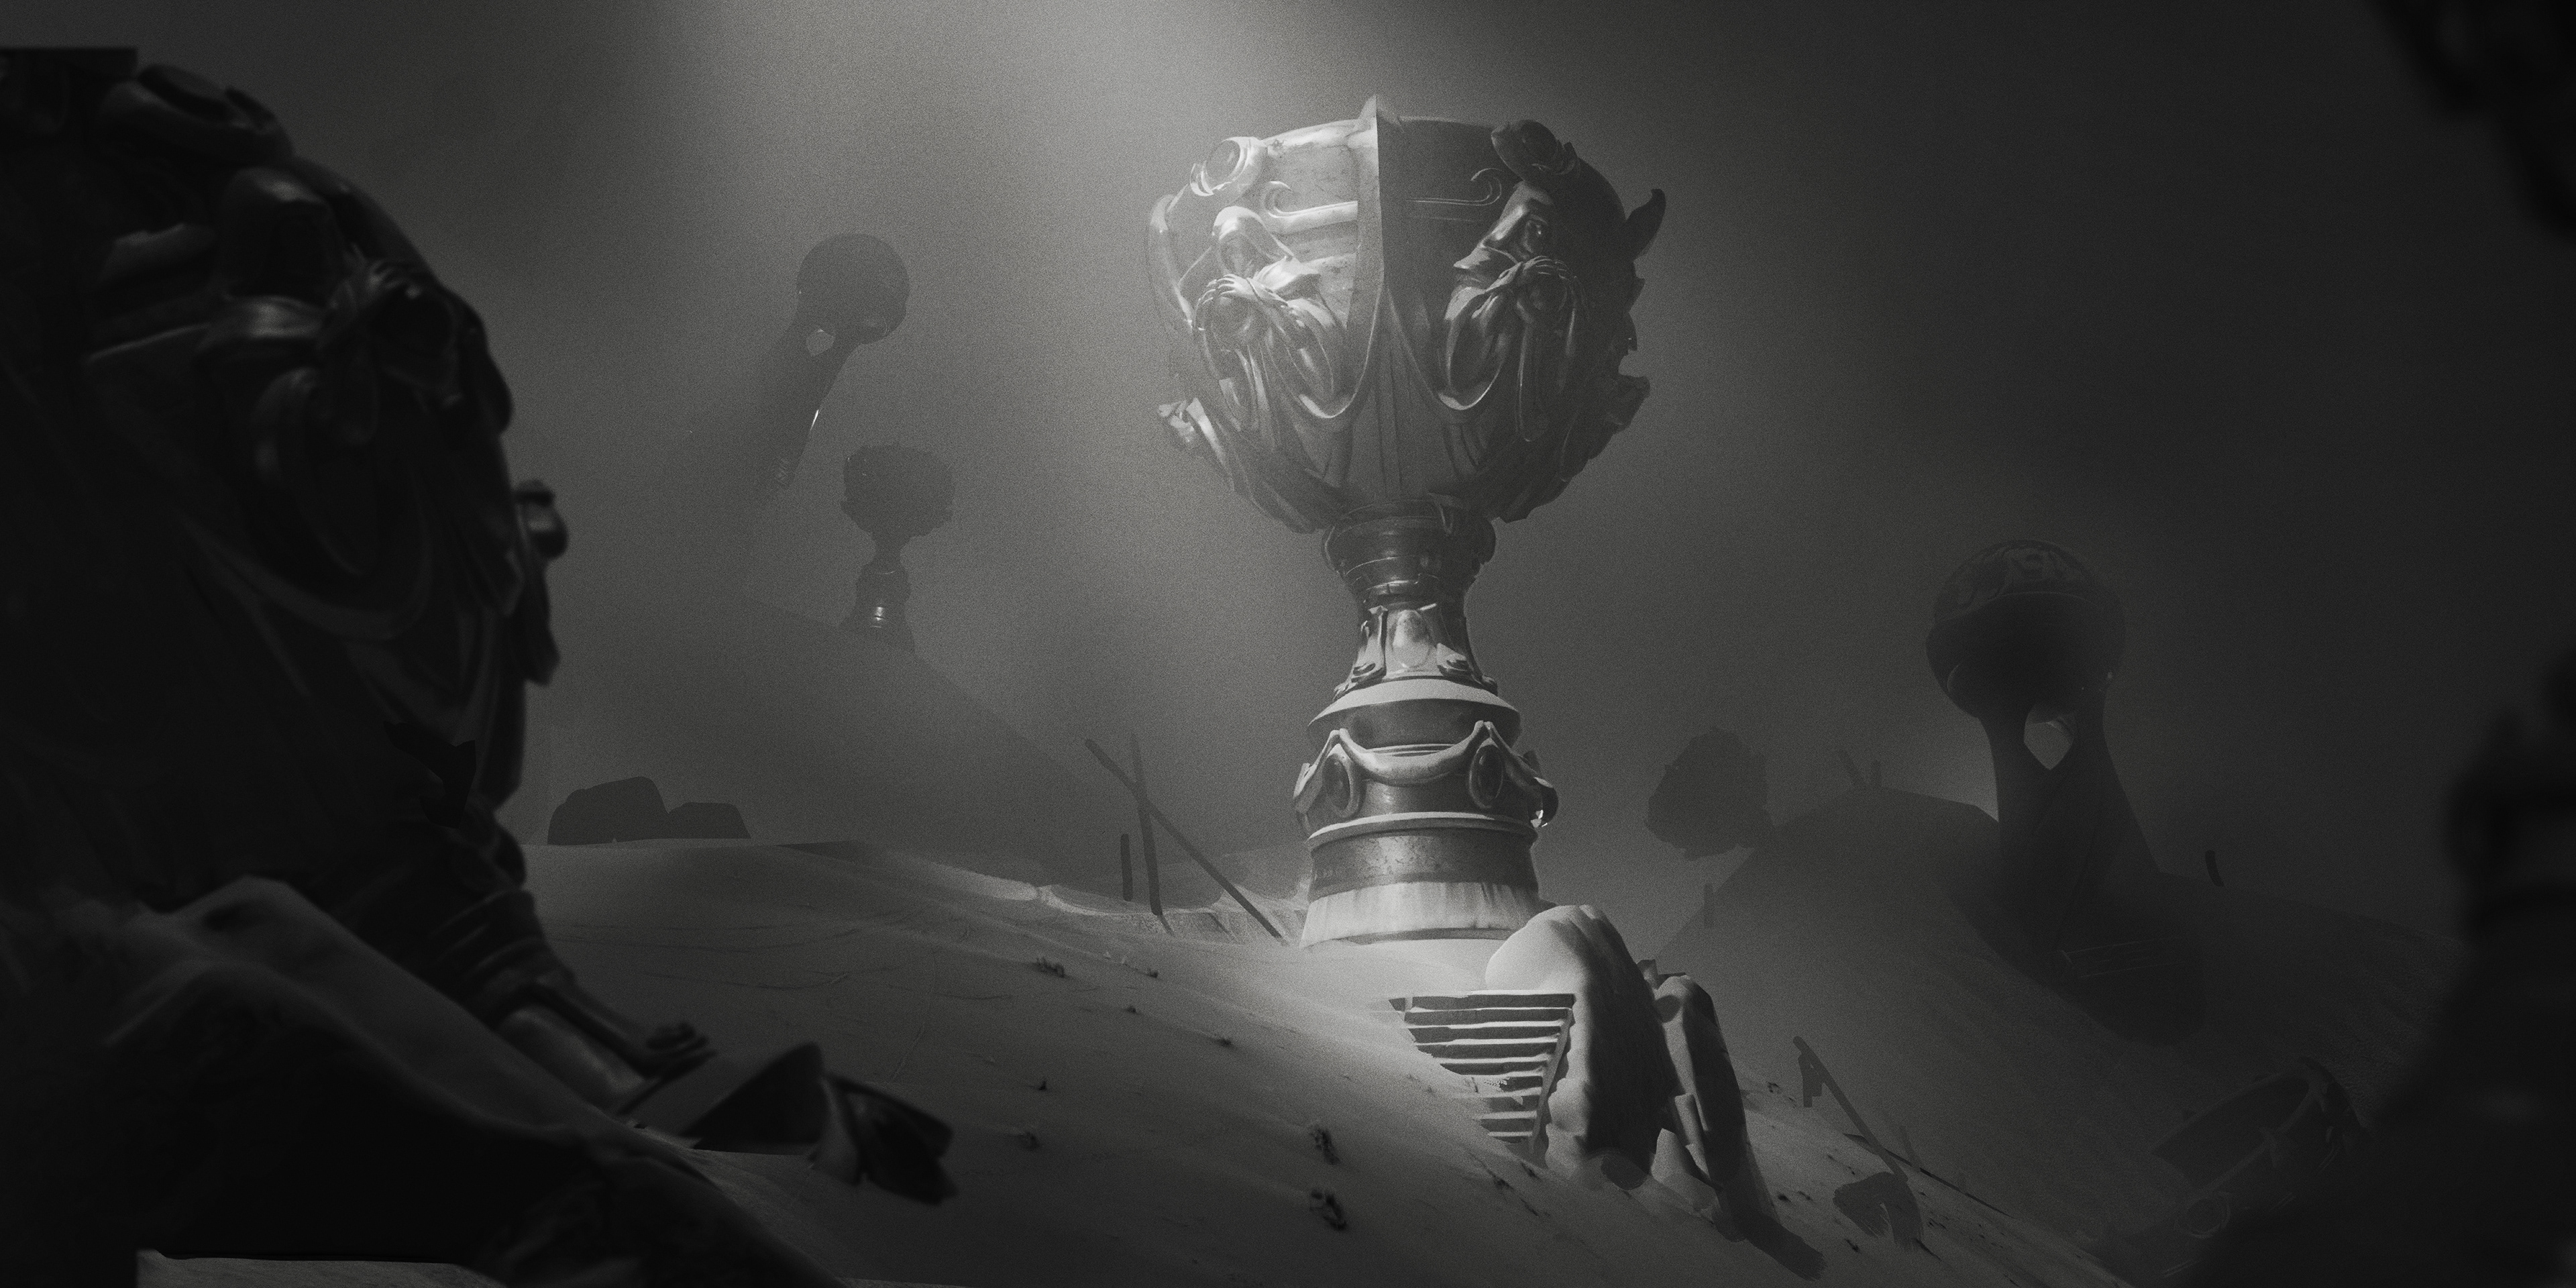 Tiffany & Co. will design the 'League of Legends' Summoner's Cup